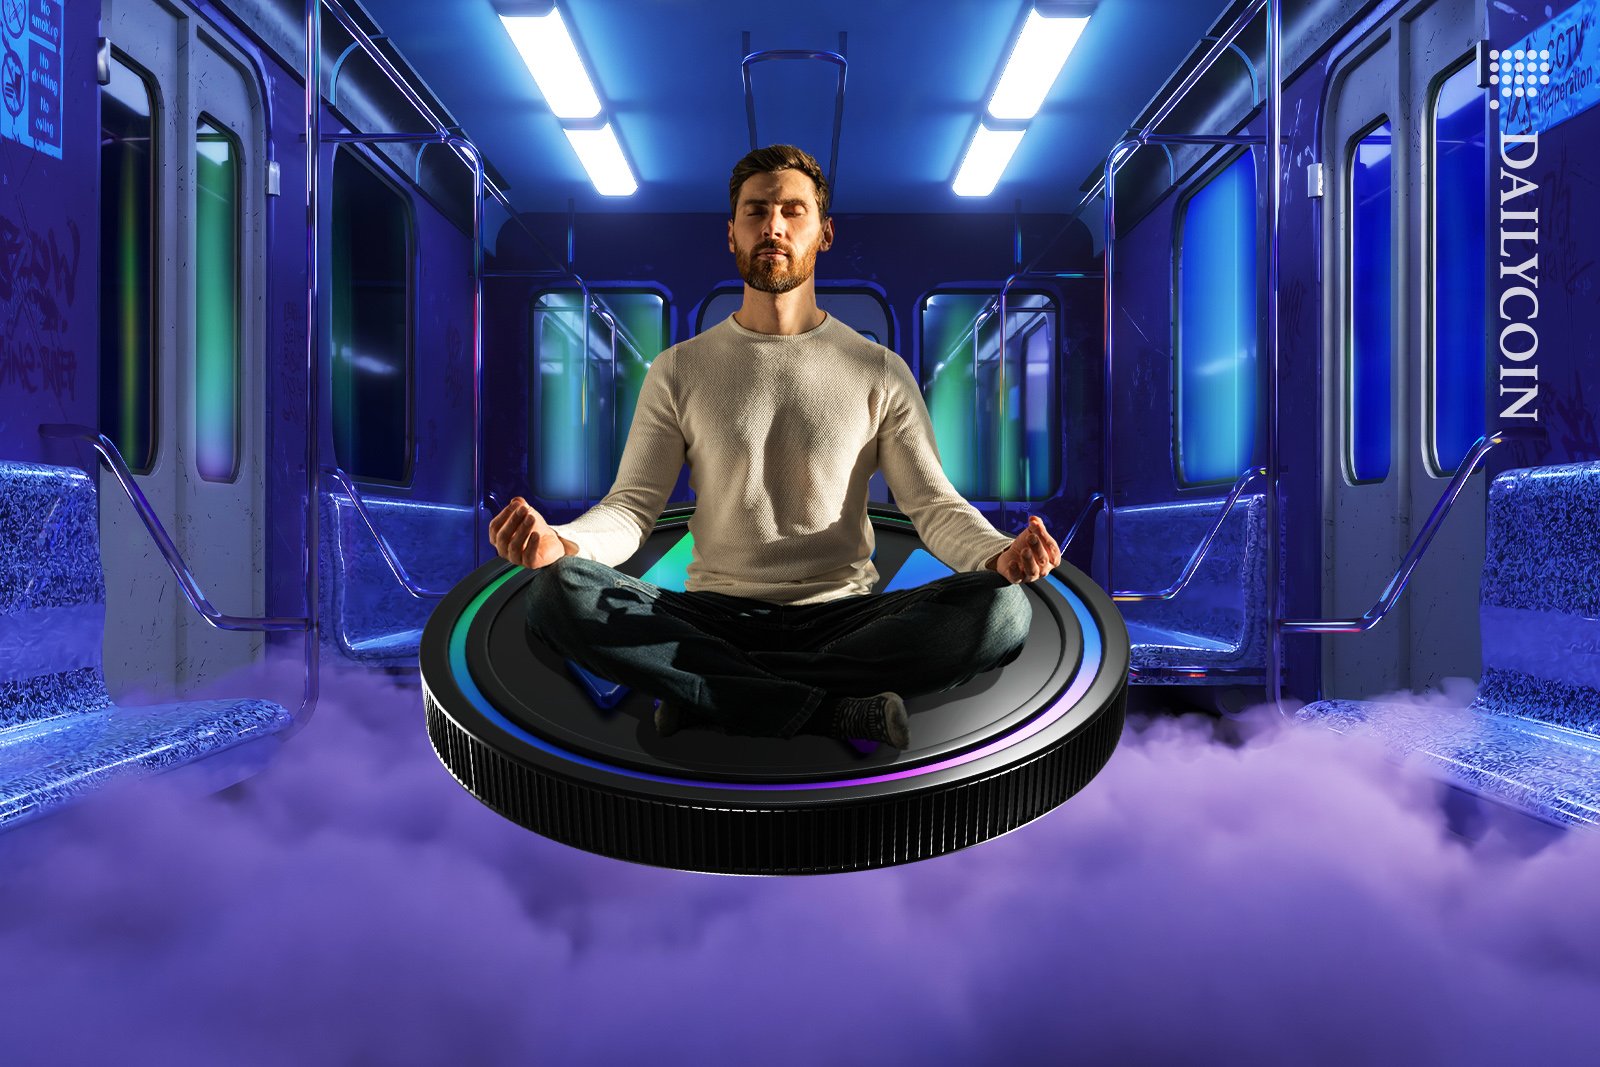 Guy is on a broken down train meditating on a hovering Solana coin.